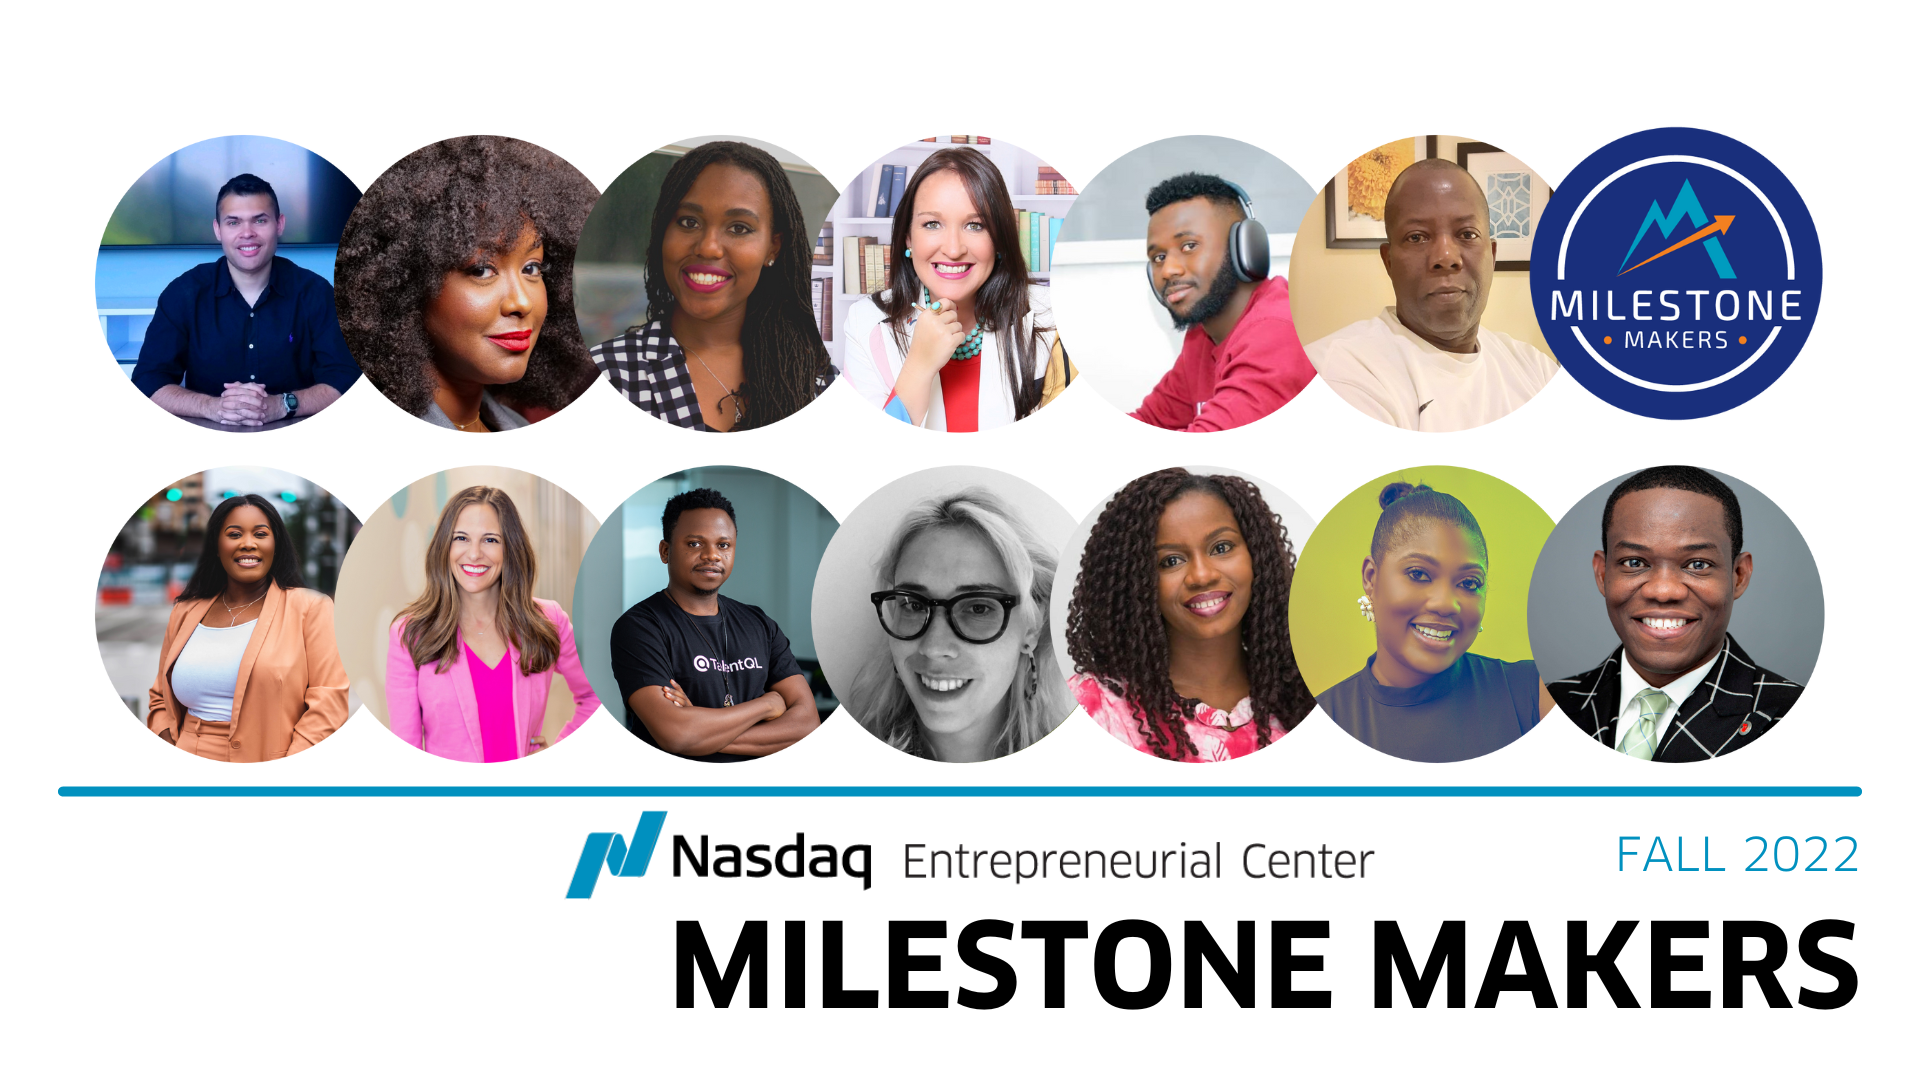 https://thecenter.nasdaq.org/wp-content/uploads/2022/10/MILESTONE-MAKERS-FALL-2022-Cohort-Graphic-1.png